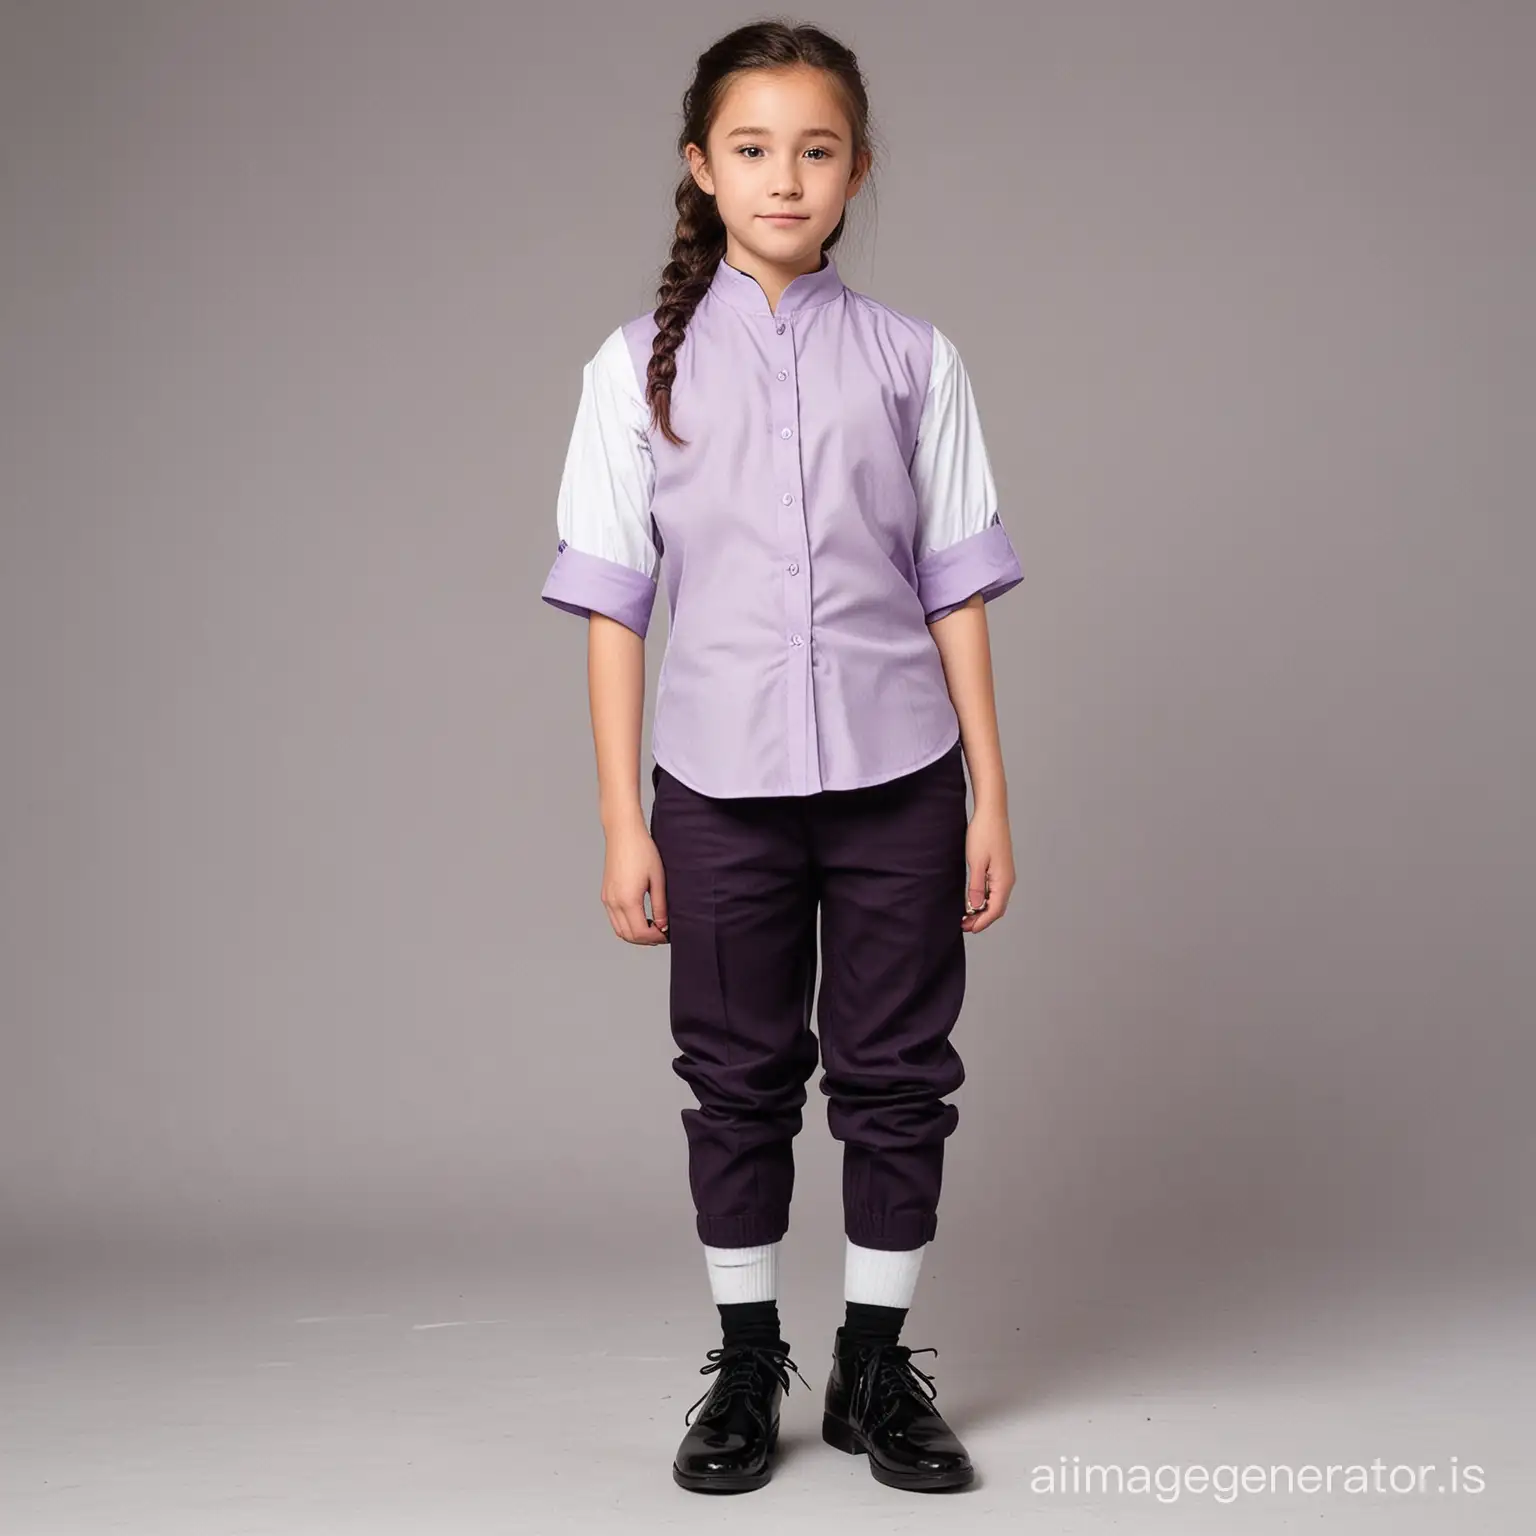 Teenage-Girl-in-Lavender-Shirt-and-Grape-Vest-Posing-Confidently